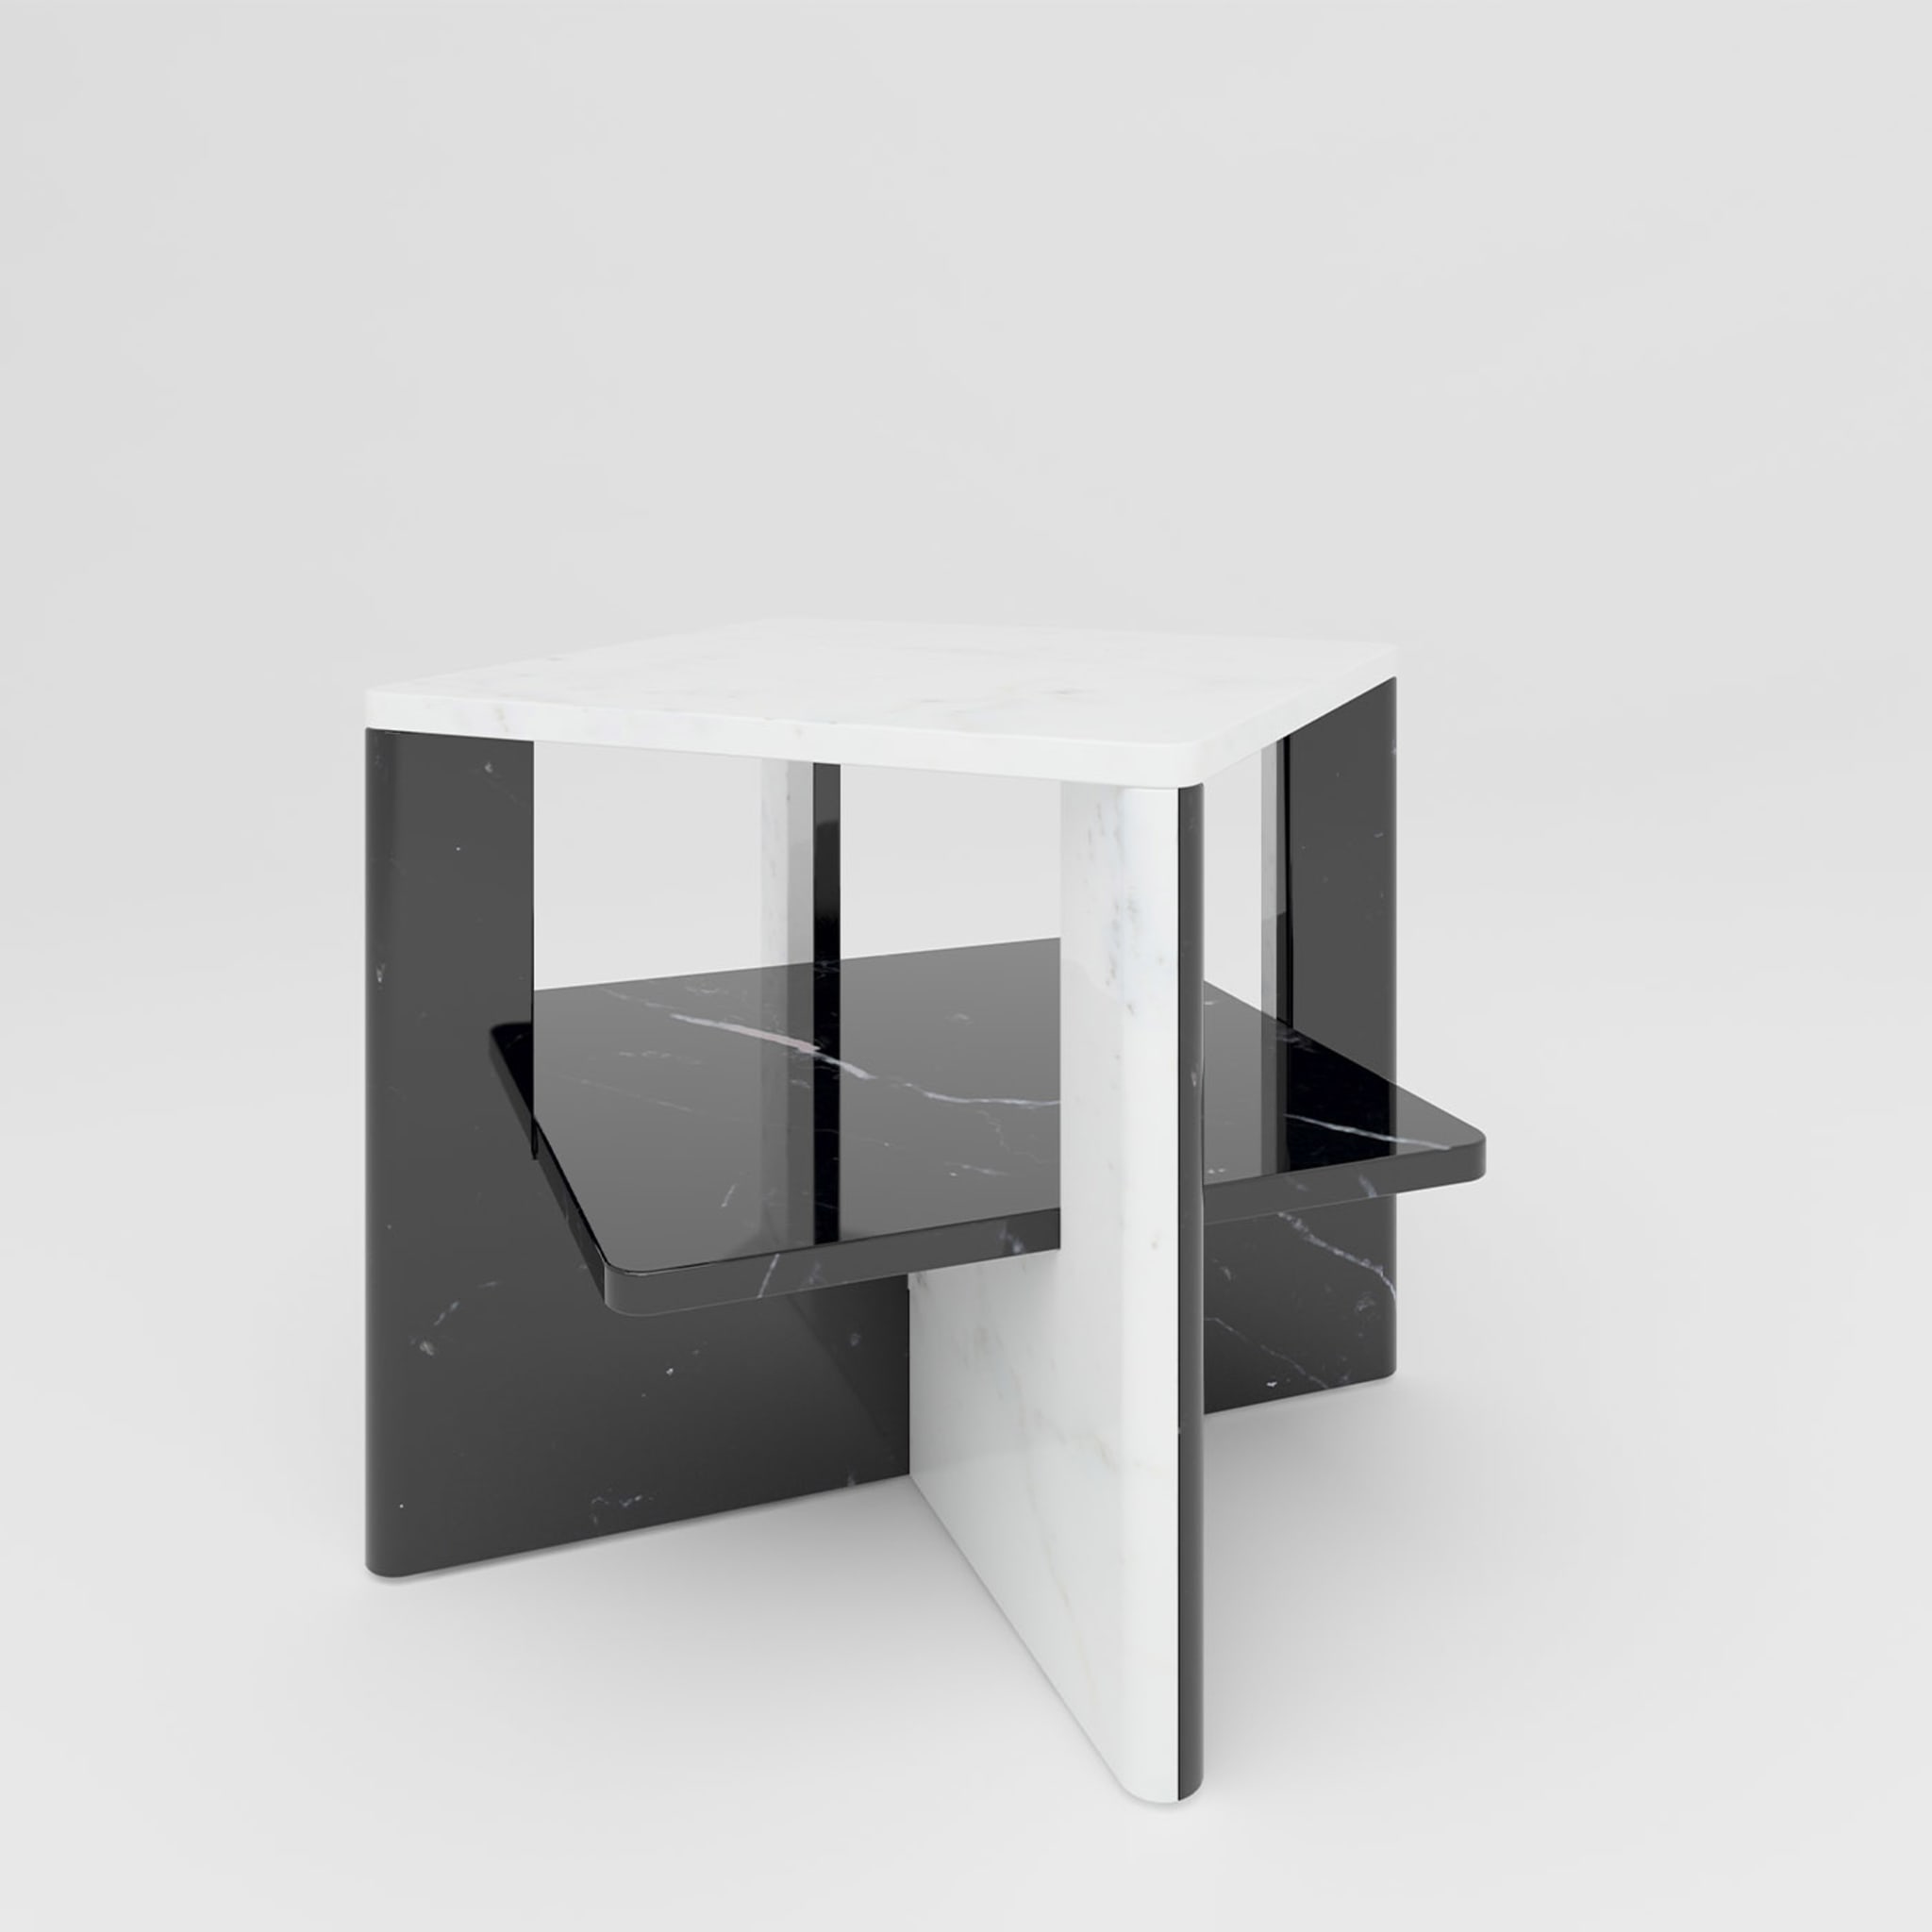 Plus+Double Marble Coffee Table #1 - Alternative view 1